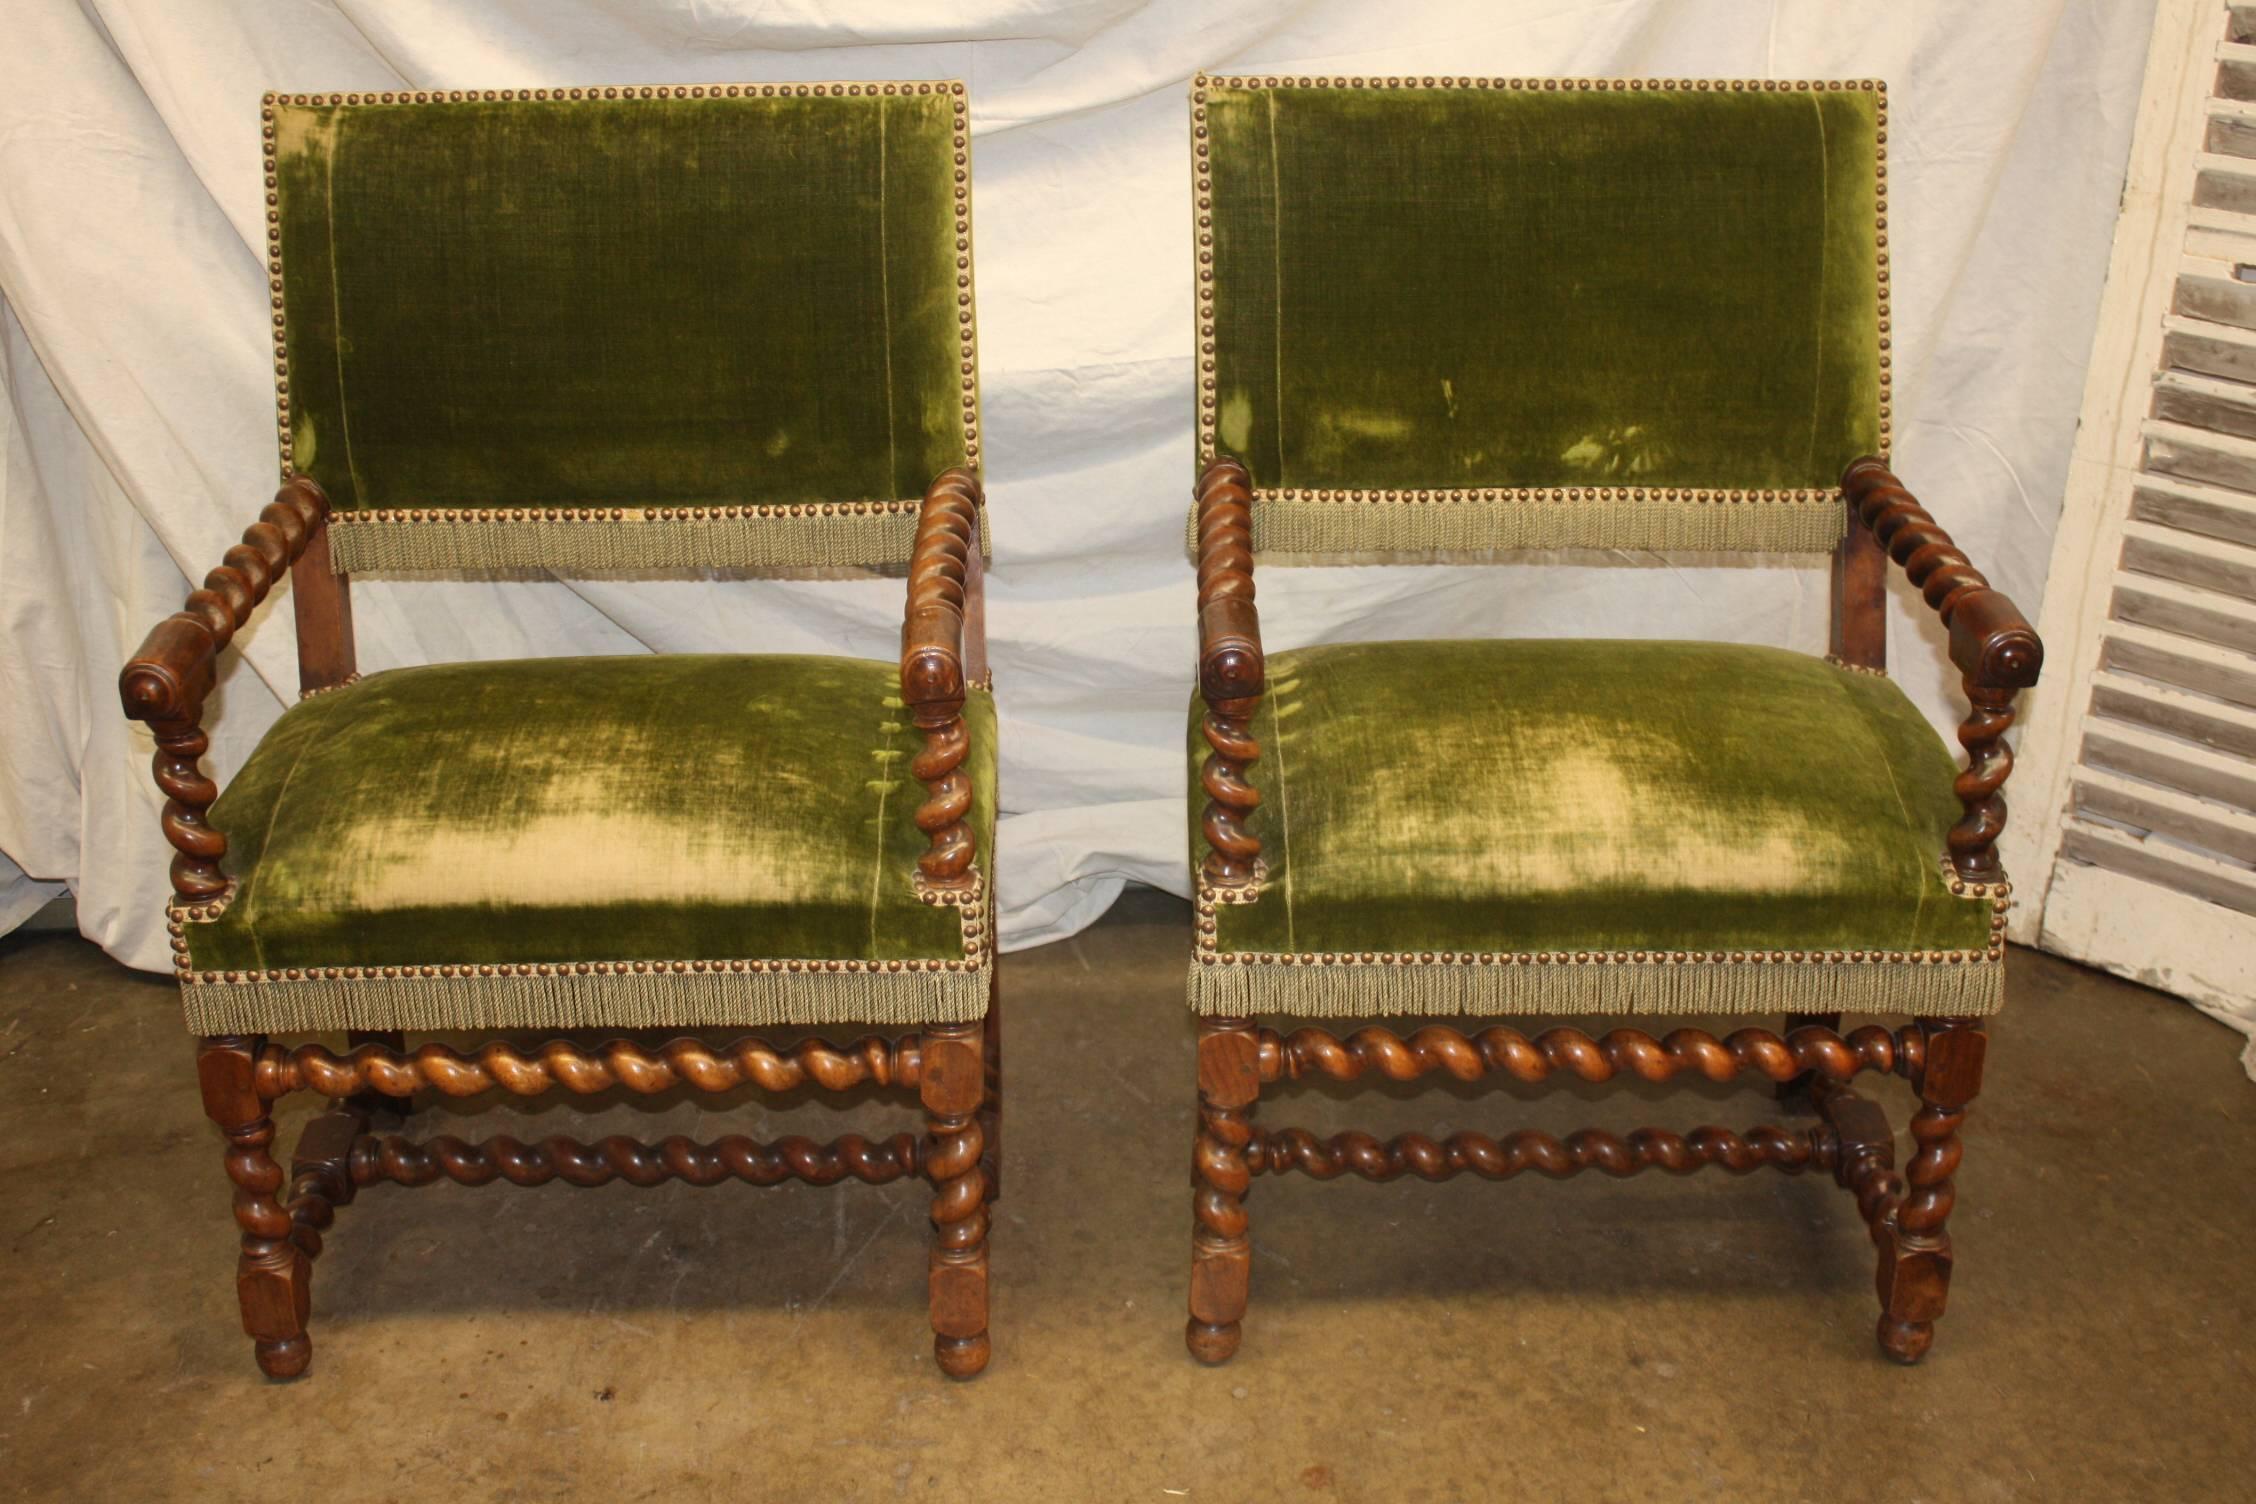 19th century Louis XIII style chairs.